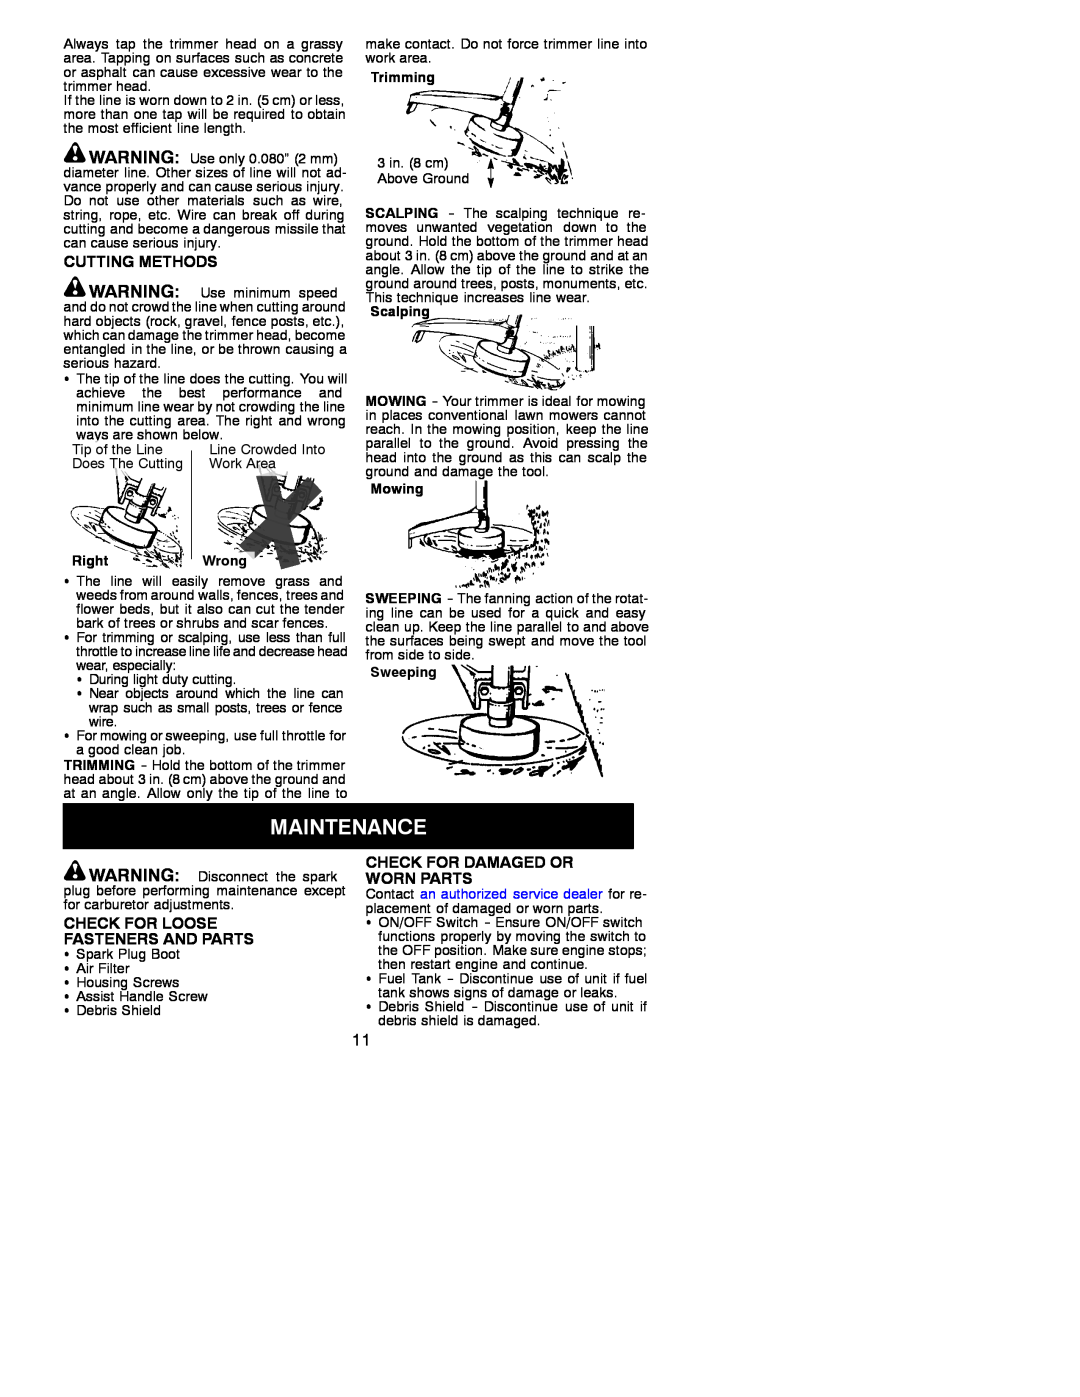 Poulan PP035 instruction manual Cutting Methods, Check For Damaged Or, Worn Parts, Check For Loose, Fasteners And Parts 